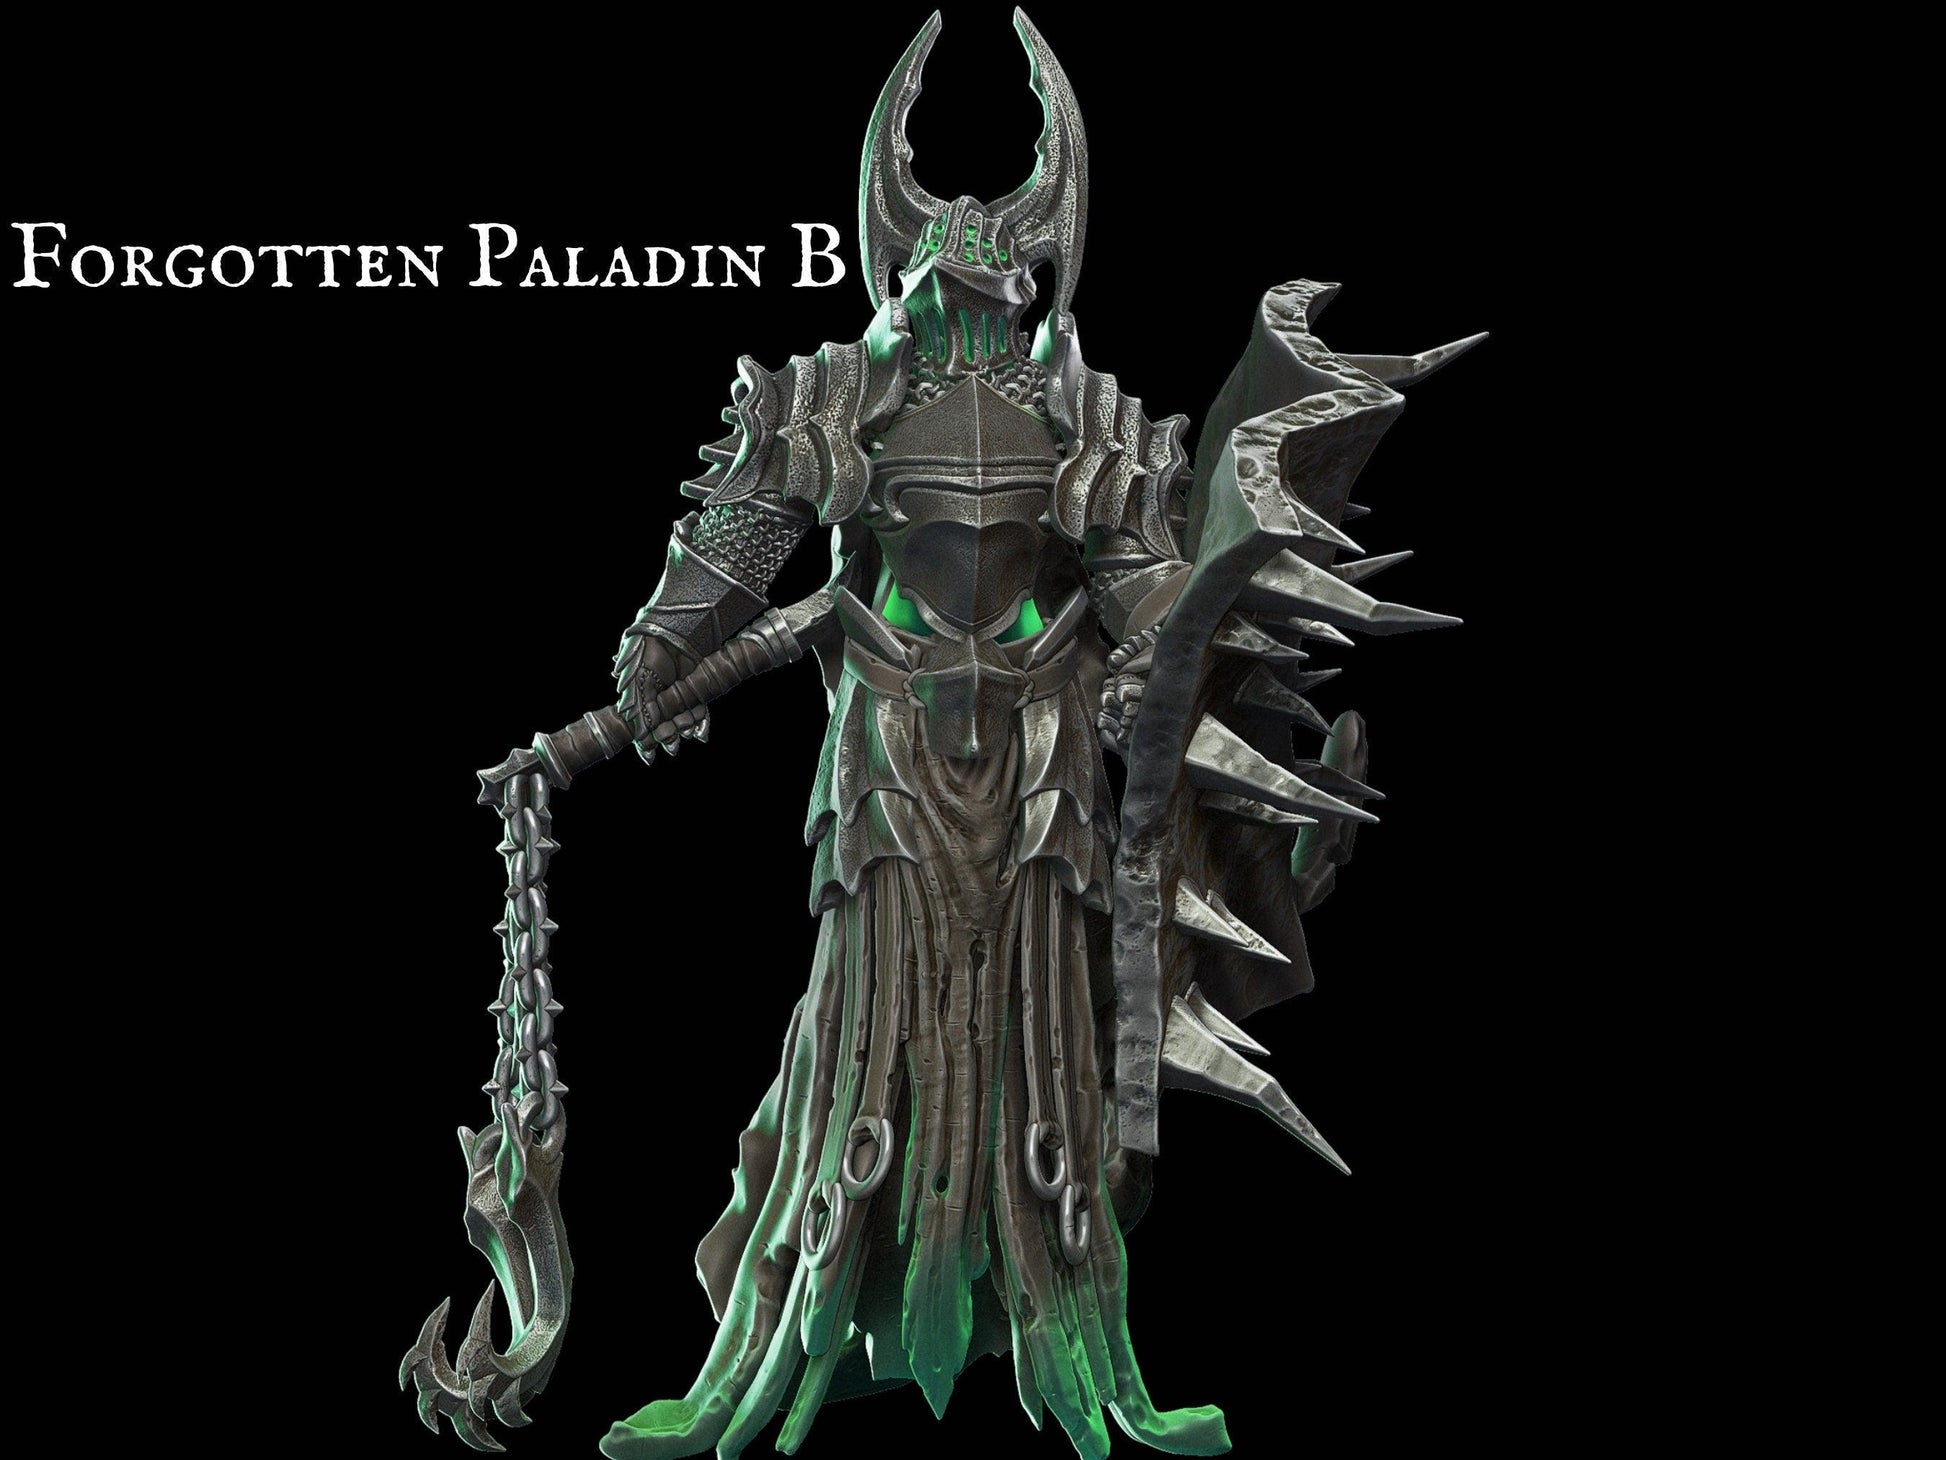 Forgotten Paladin Miniature Monster Miniature | 28mm scale Tabletop gaming DnD Miniature Dungeons and Dragons dnd 5e dungeon master gift demon - Plague Miniatures shop for DnD Miniatures